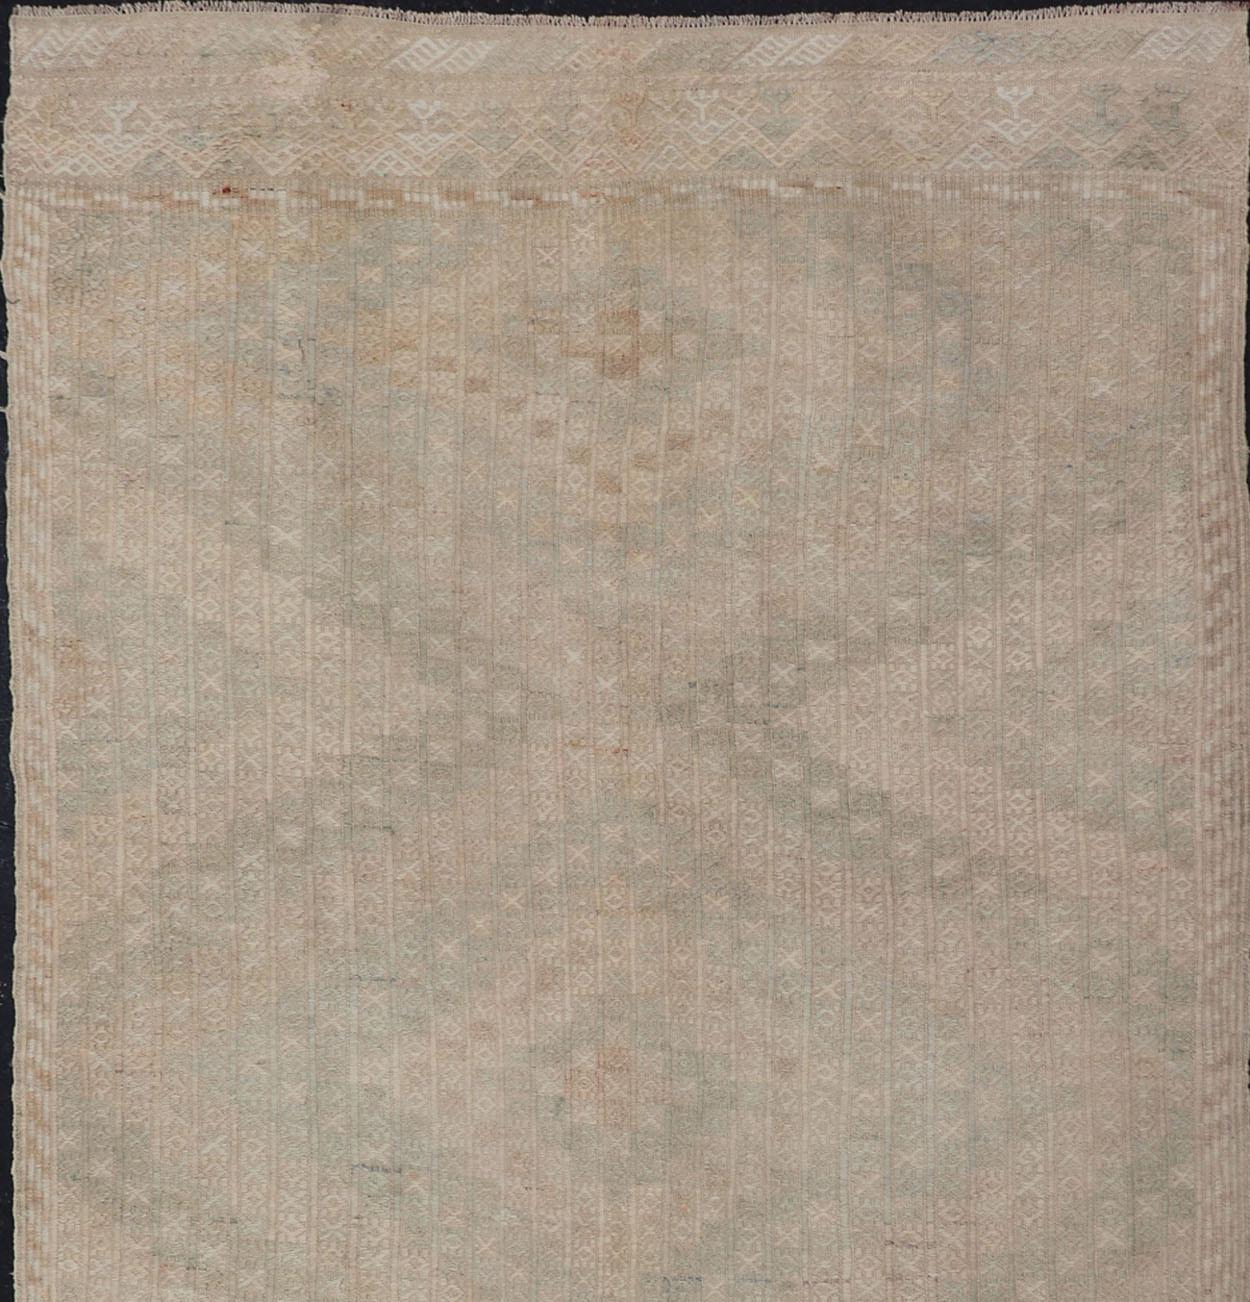 Vintage Gallery Turkish Embroidered Rug with Geometric Design in Soft Tones.
Embroidered vintage flat weave gallery rug from Turkey in shades of tan, taupe, green, cream and neutrals with geometric pattern, / rug EN-176475, country of origin /